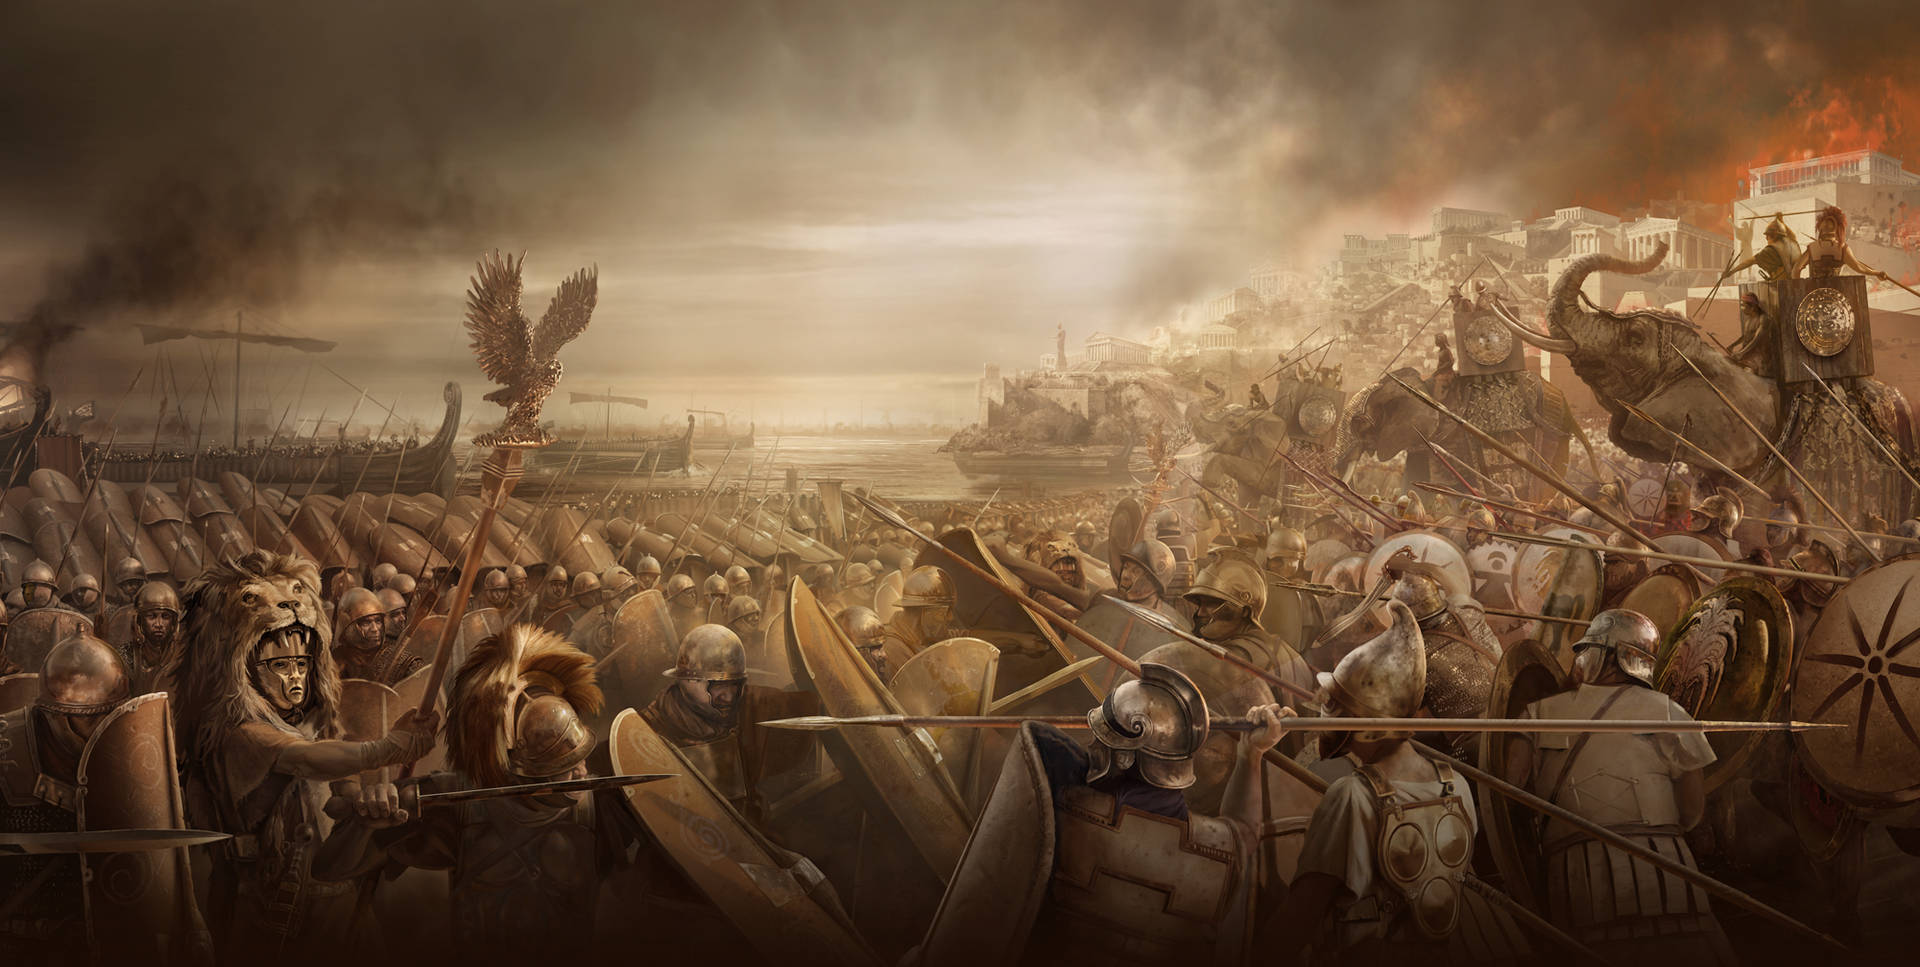 Epic Battle Of Carthage - Mighty Elephants In Action Wallpaper